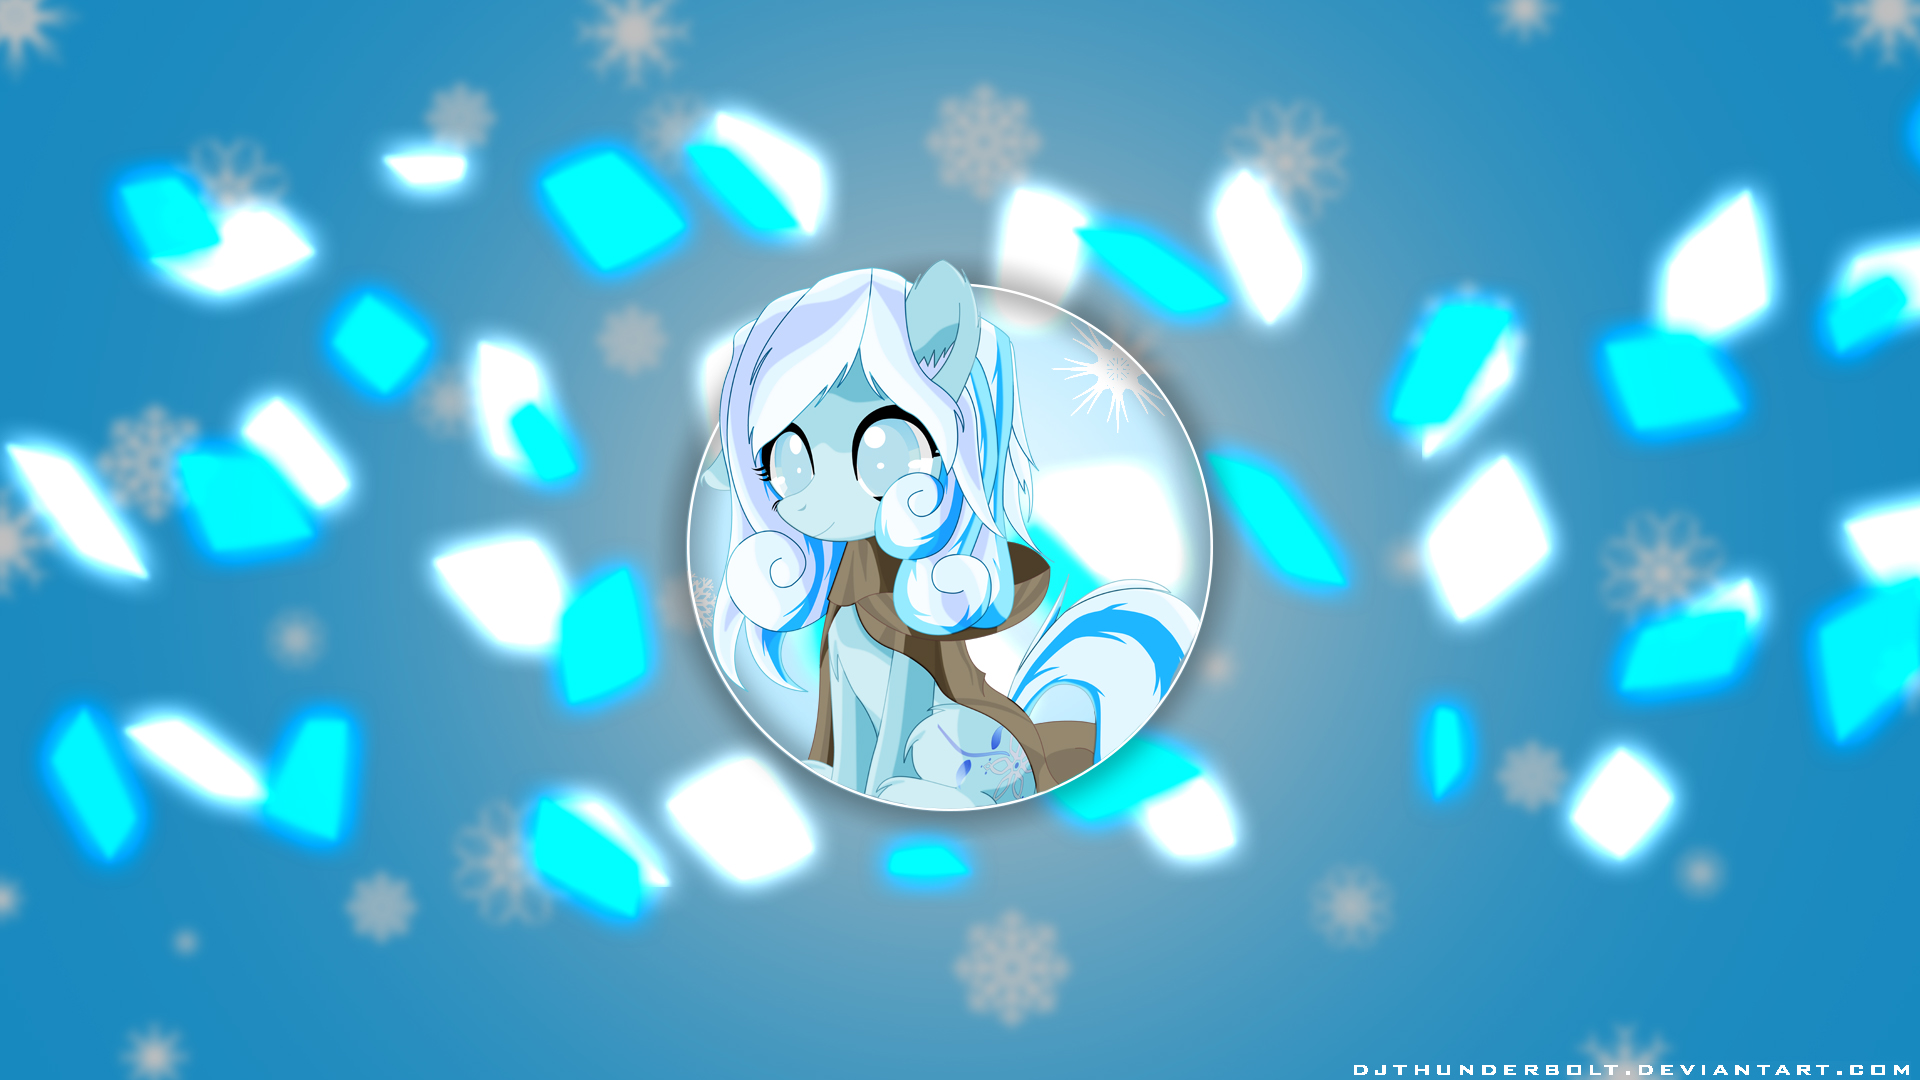 Snowdrop Wallpaper by AntamoAnimisAN-M and IIThunderboltII